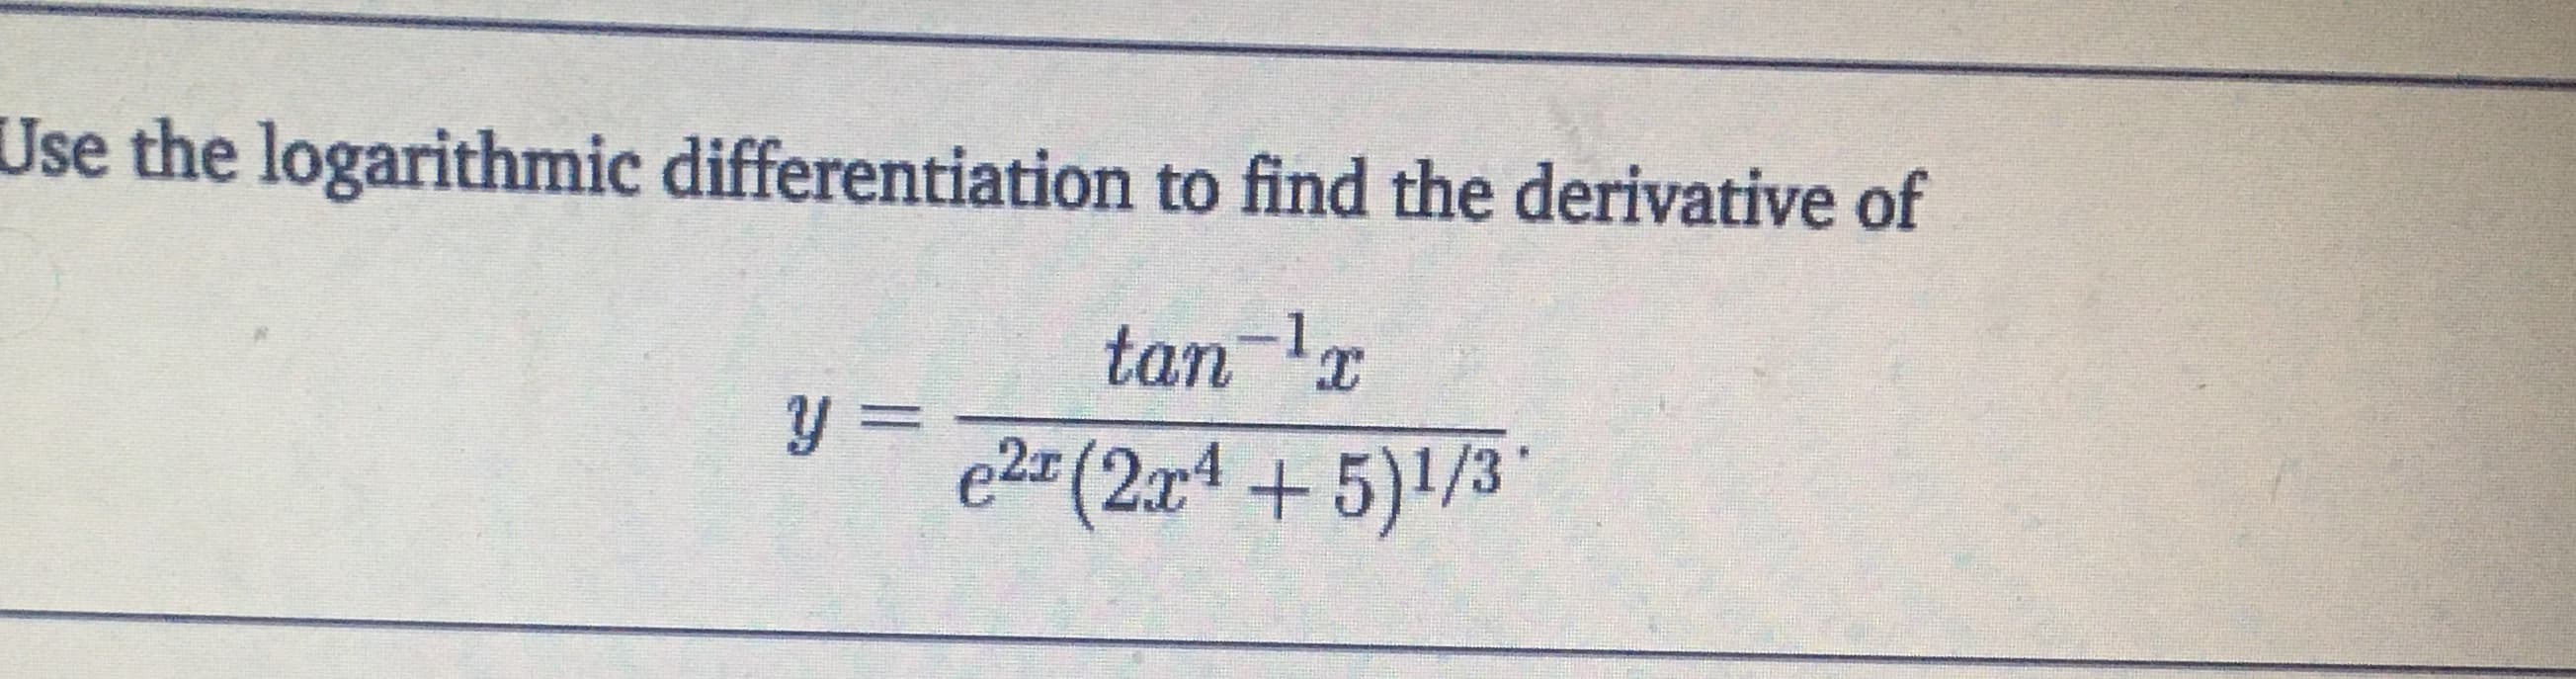 Jse the logarithmic differentiation to find the derivative of
tan-lx
y =
e2=(2x4+5)1/3
